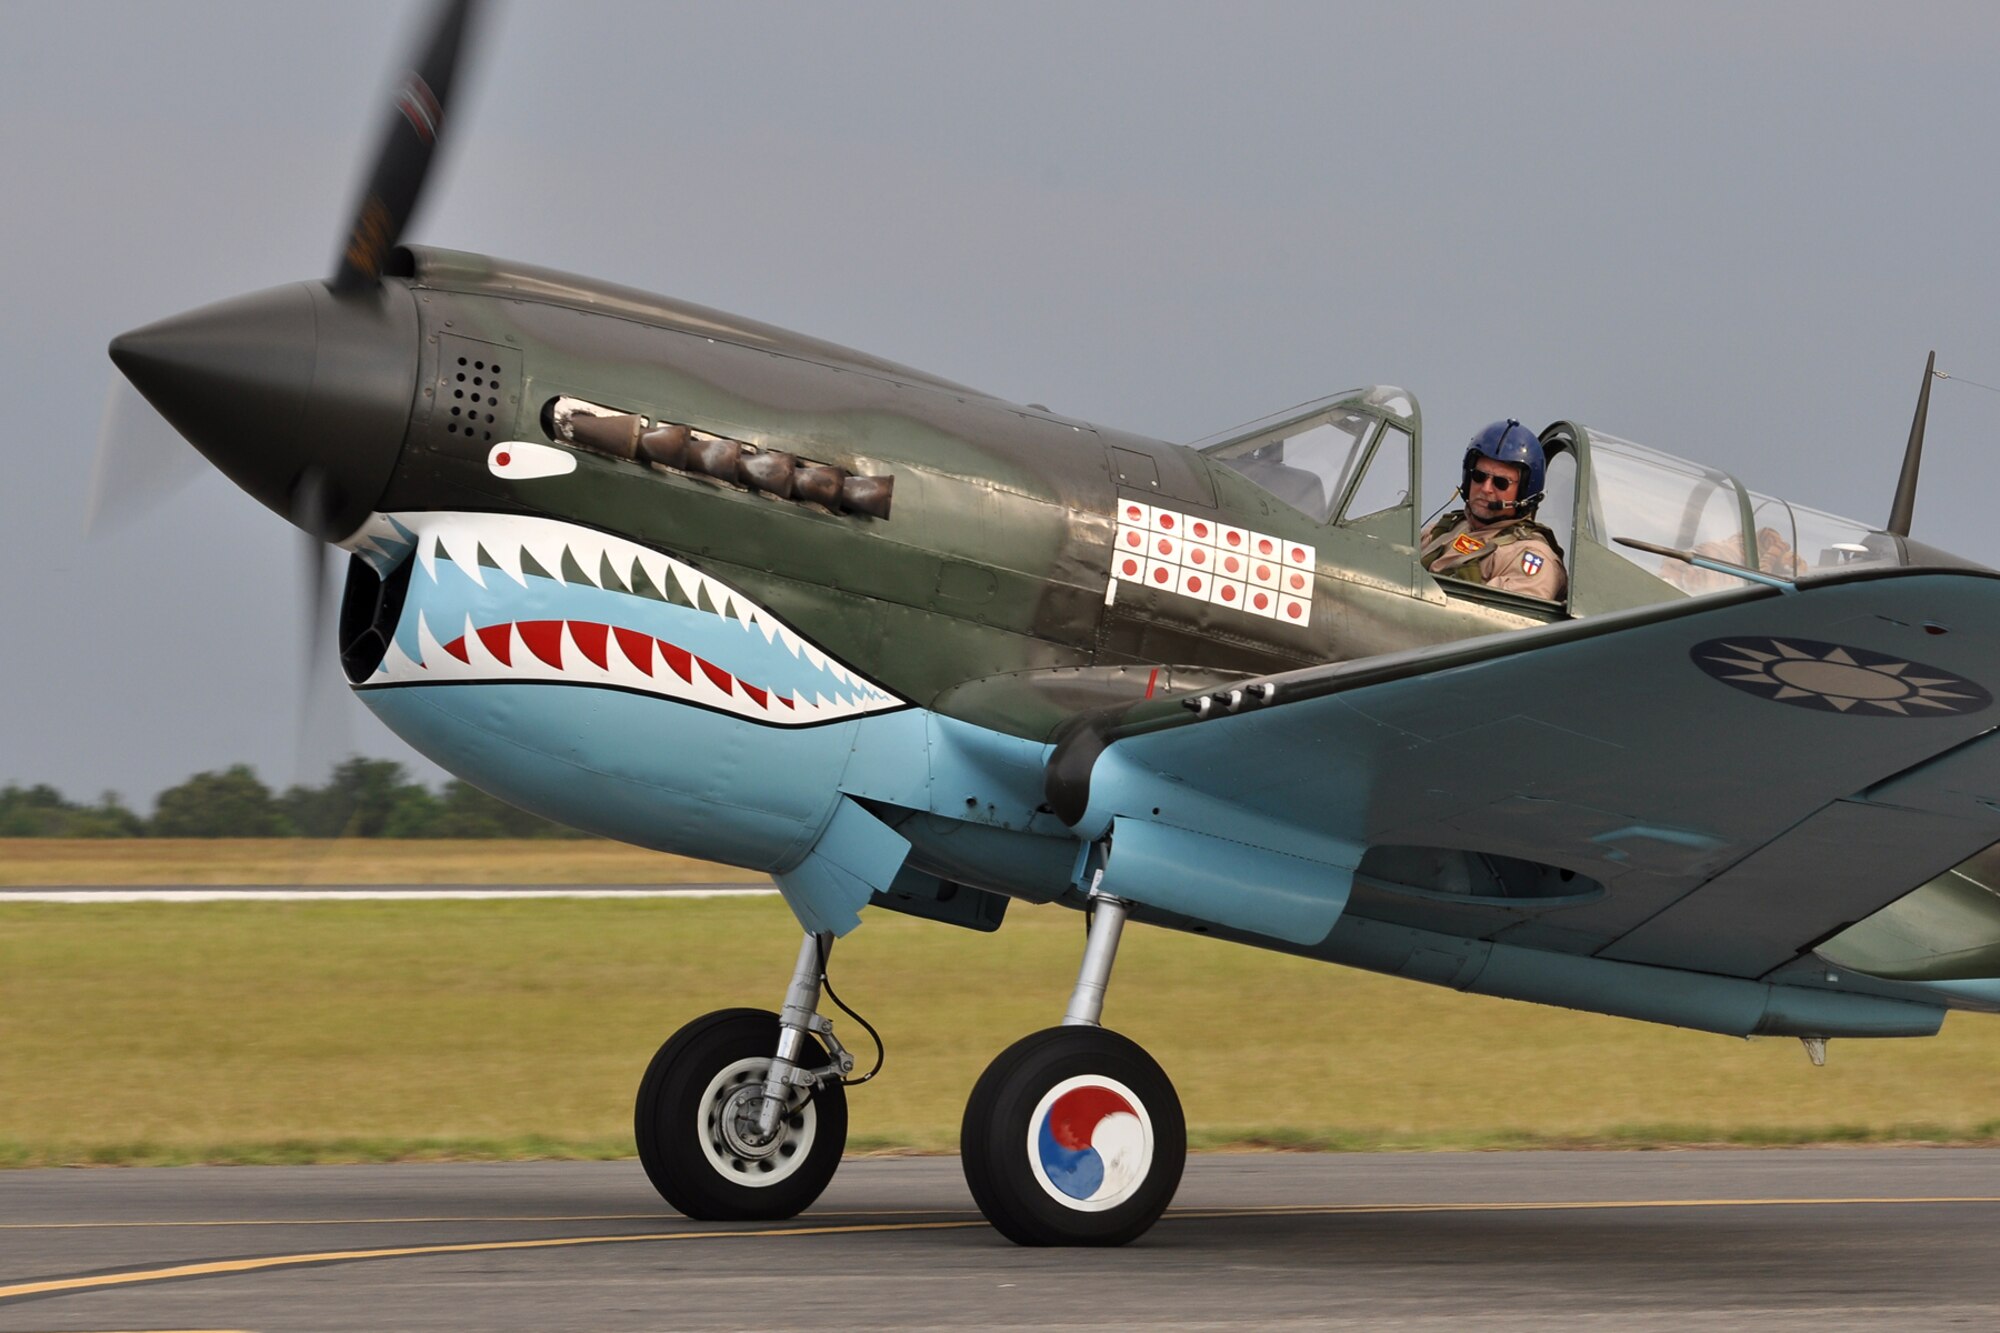 Mike Anderson taxis his Curtis P-40 Warhawk to the runway before take-off at Tyler Pounds Regional Airport in Tyler, Texas, July 2, 2011. Anderson was preparing to participate in the Cedar Creek Lake Air Show, “Thunder Over Cedar Creek Lake,” near Mabank, Texas. The aircraft is owned by the Commemorative Air Force, and Anderson has more than 4,000 total hours flying. He also flies the P-40 in the “Tora! Tora! Tora!” re-enactment, a spectator favorite at air shows across the country. (U.S. Air Force photo/Tech. Sgt. Jeff Walston)